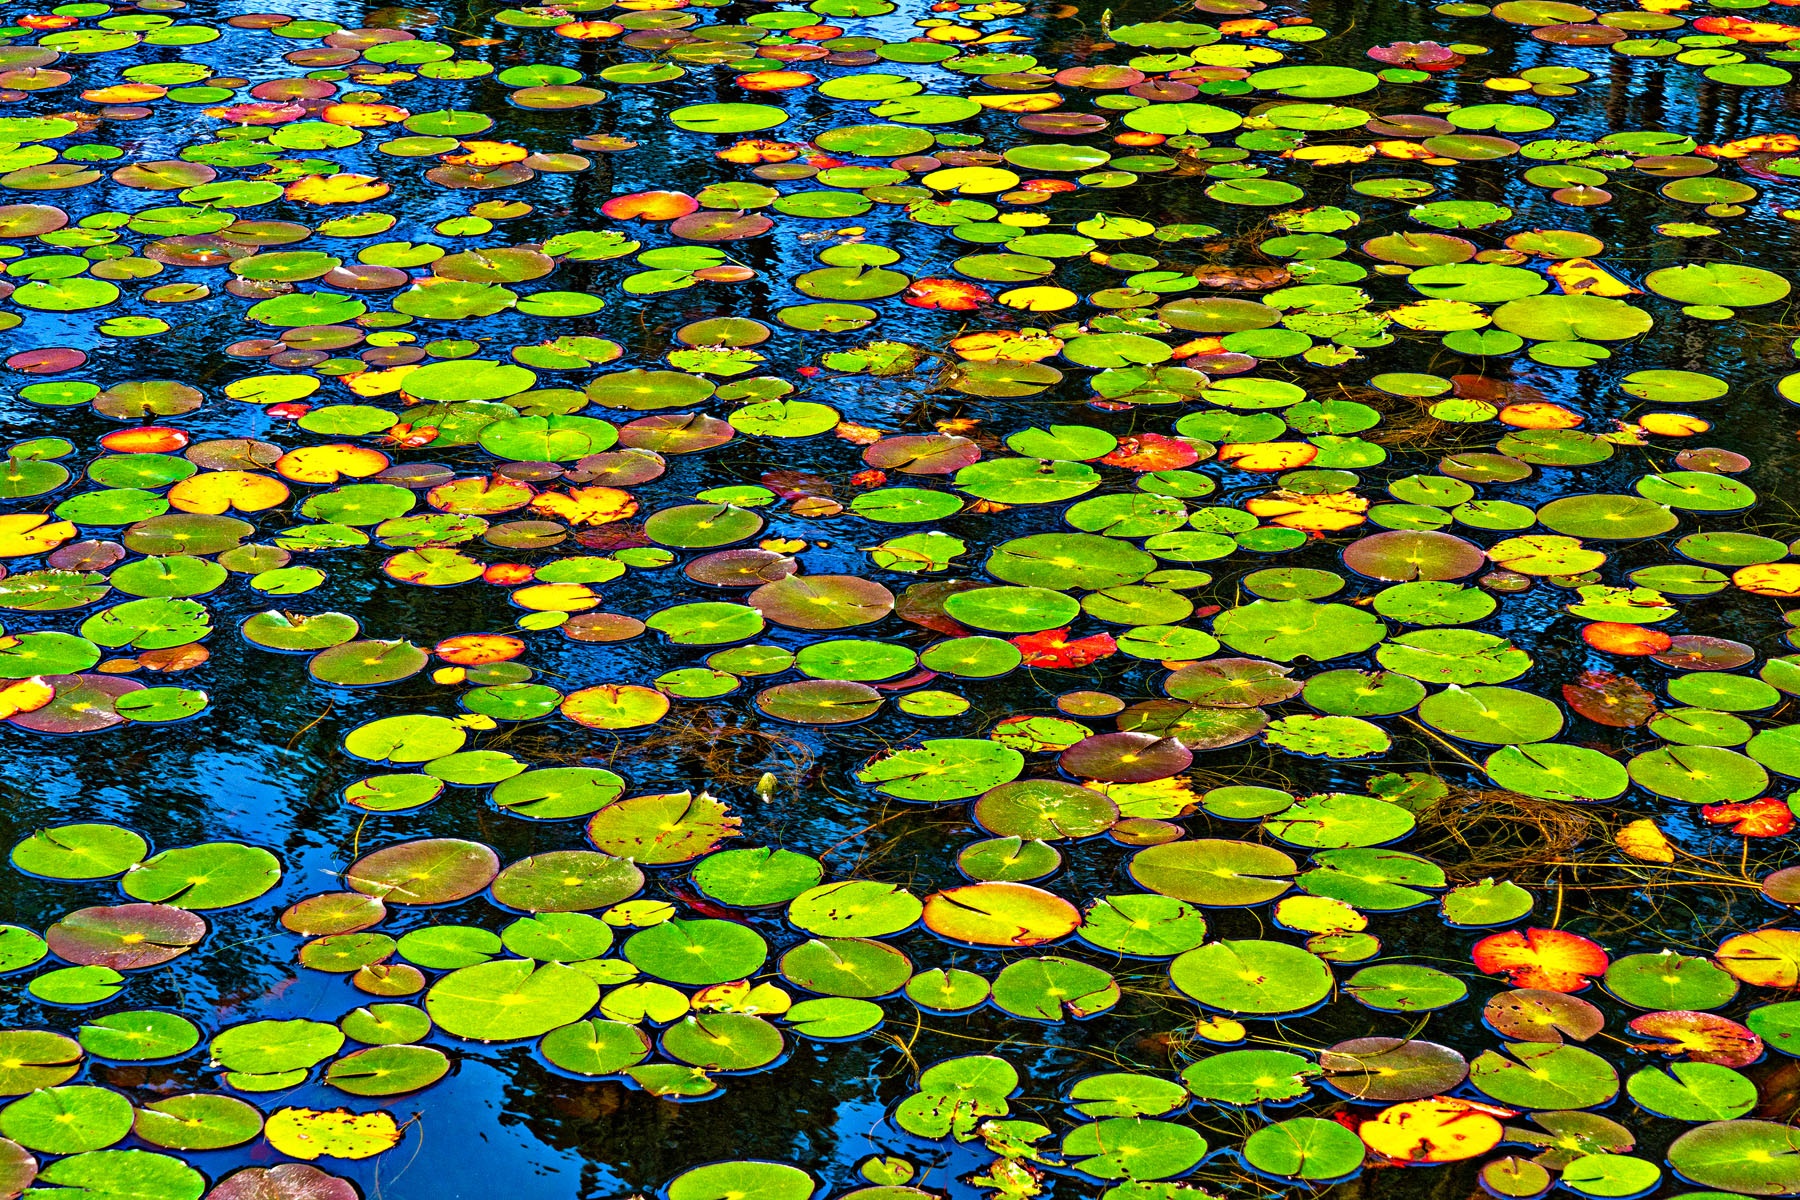 POLKA DOTS - I think this also could be titled “Pac-Man Dodgeums”. Anyway, I passed this pond of lilyless lily-pads, and was taken by the assortment of  colors and how bright they were. I had to stop and shoot it. One of my favorites.